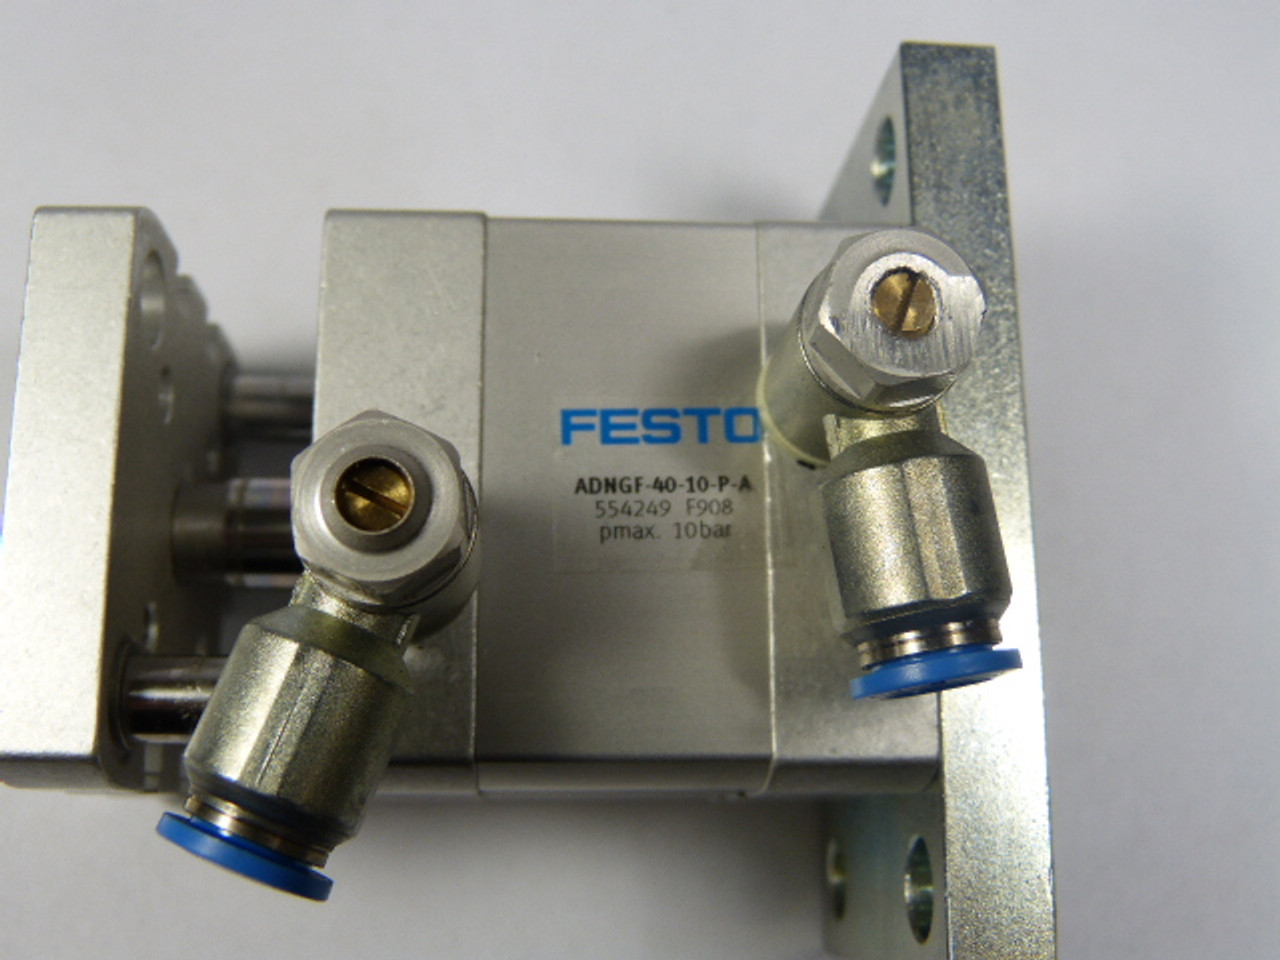 Festo ADNGF-40-10-P-A Compact Cylinder 40 Mm Bore 10MM Stroke 554249 USED